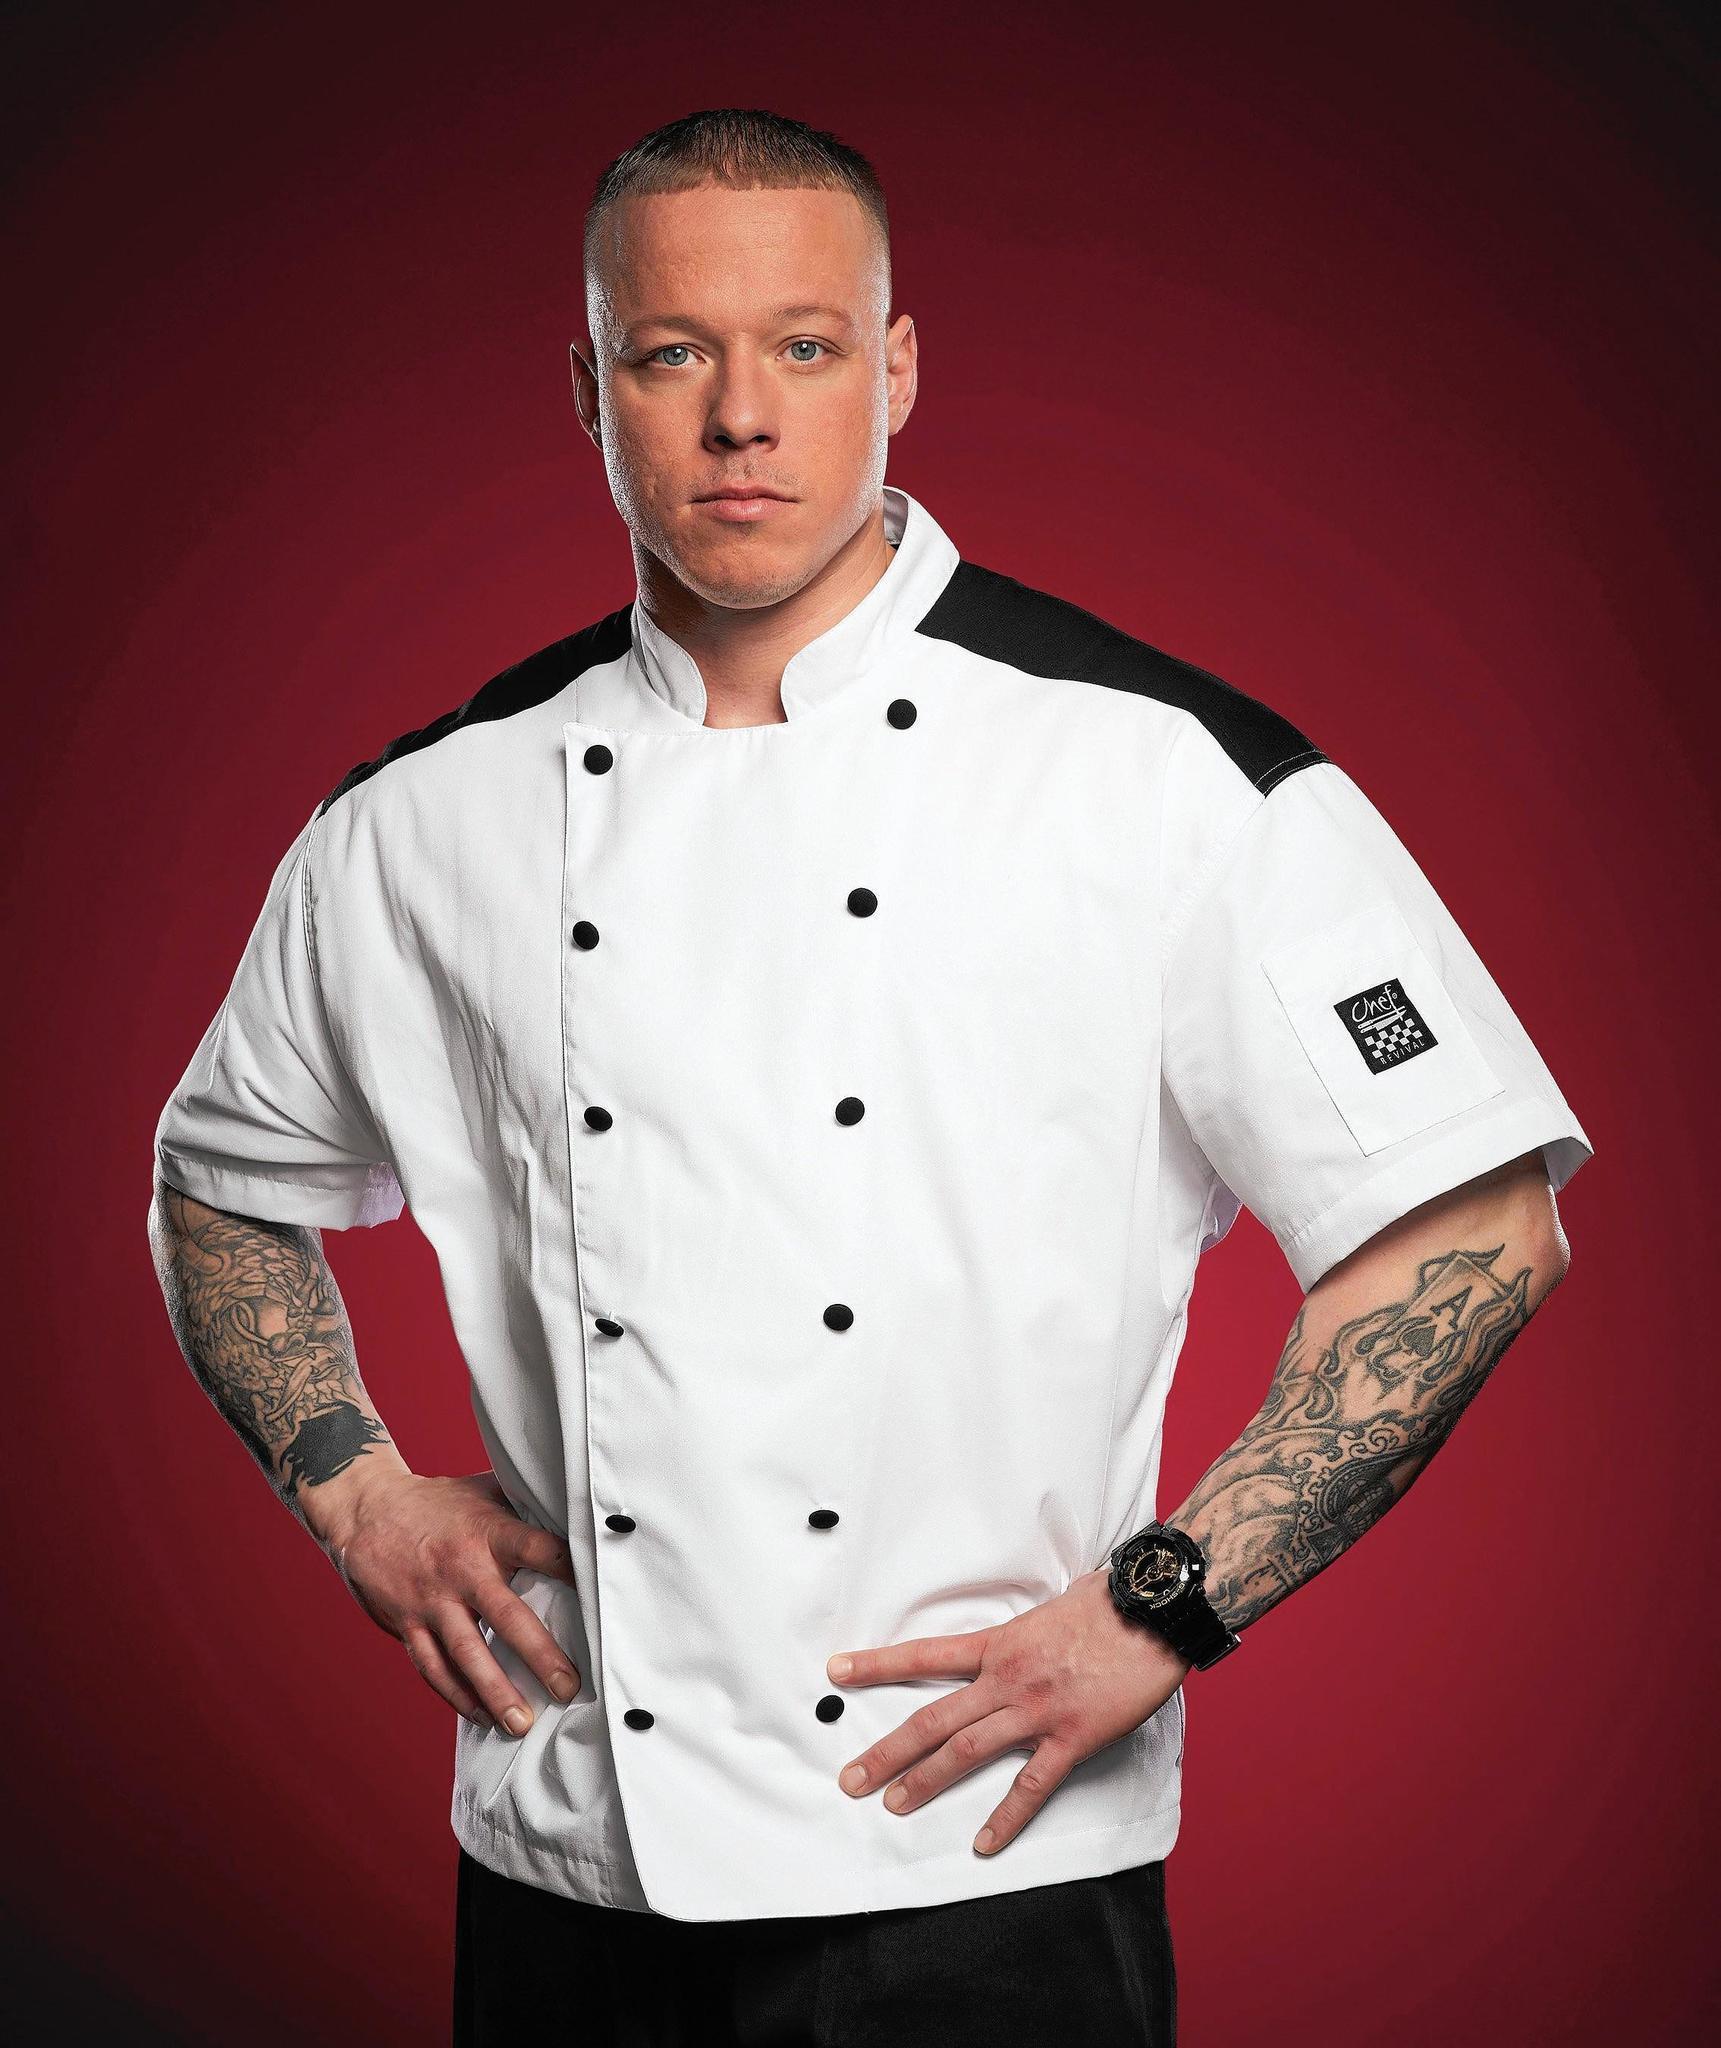 CT Chef Van Hurd Talks About BBQ And His All Star Return To